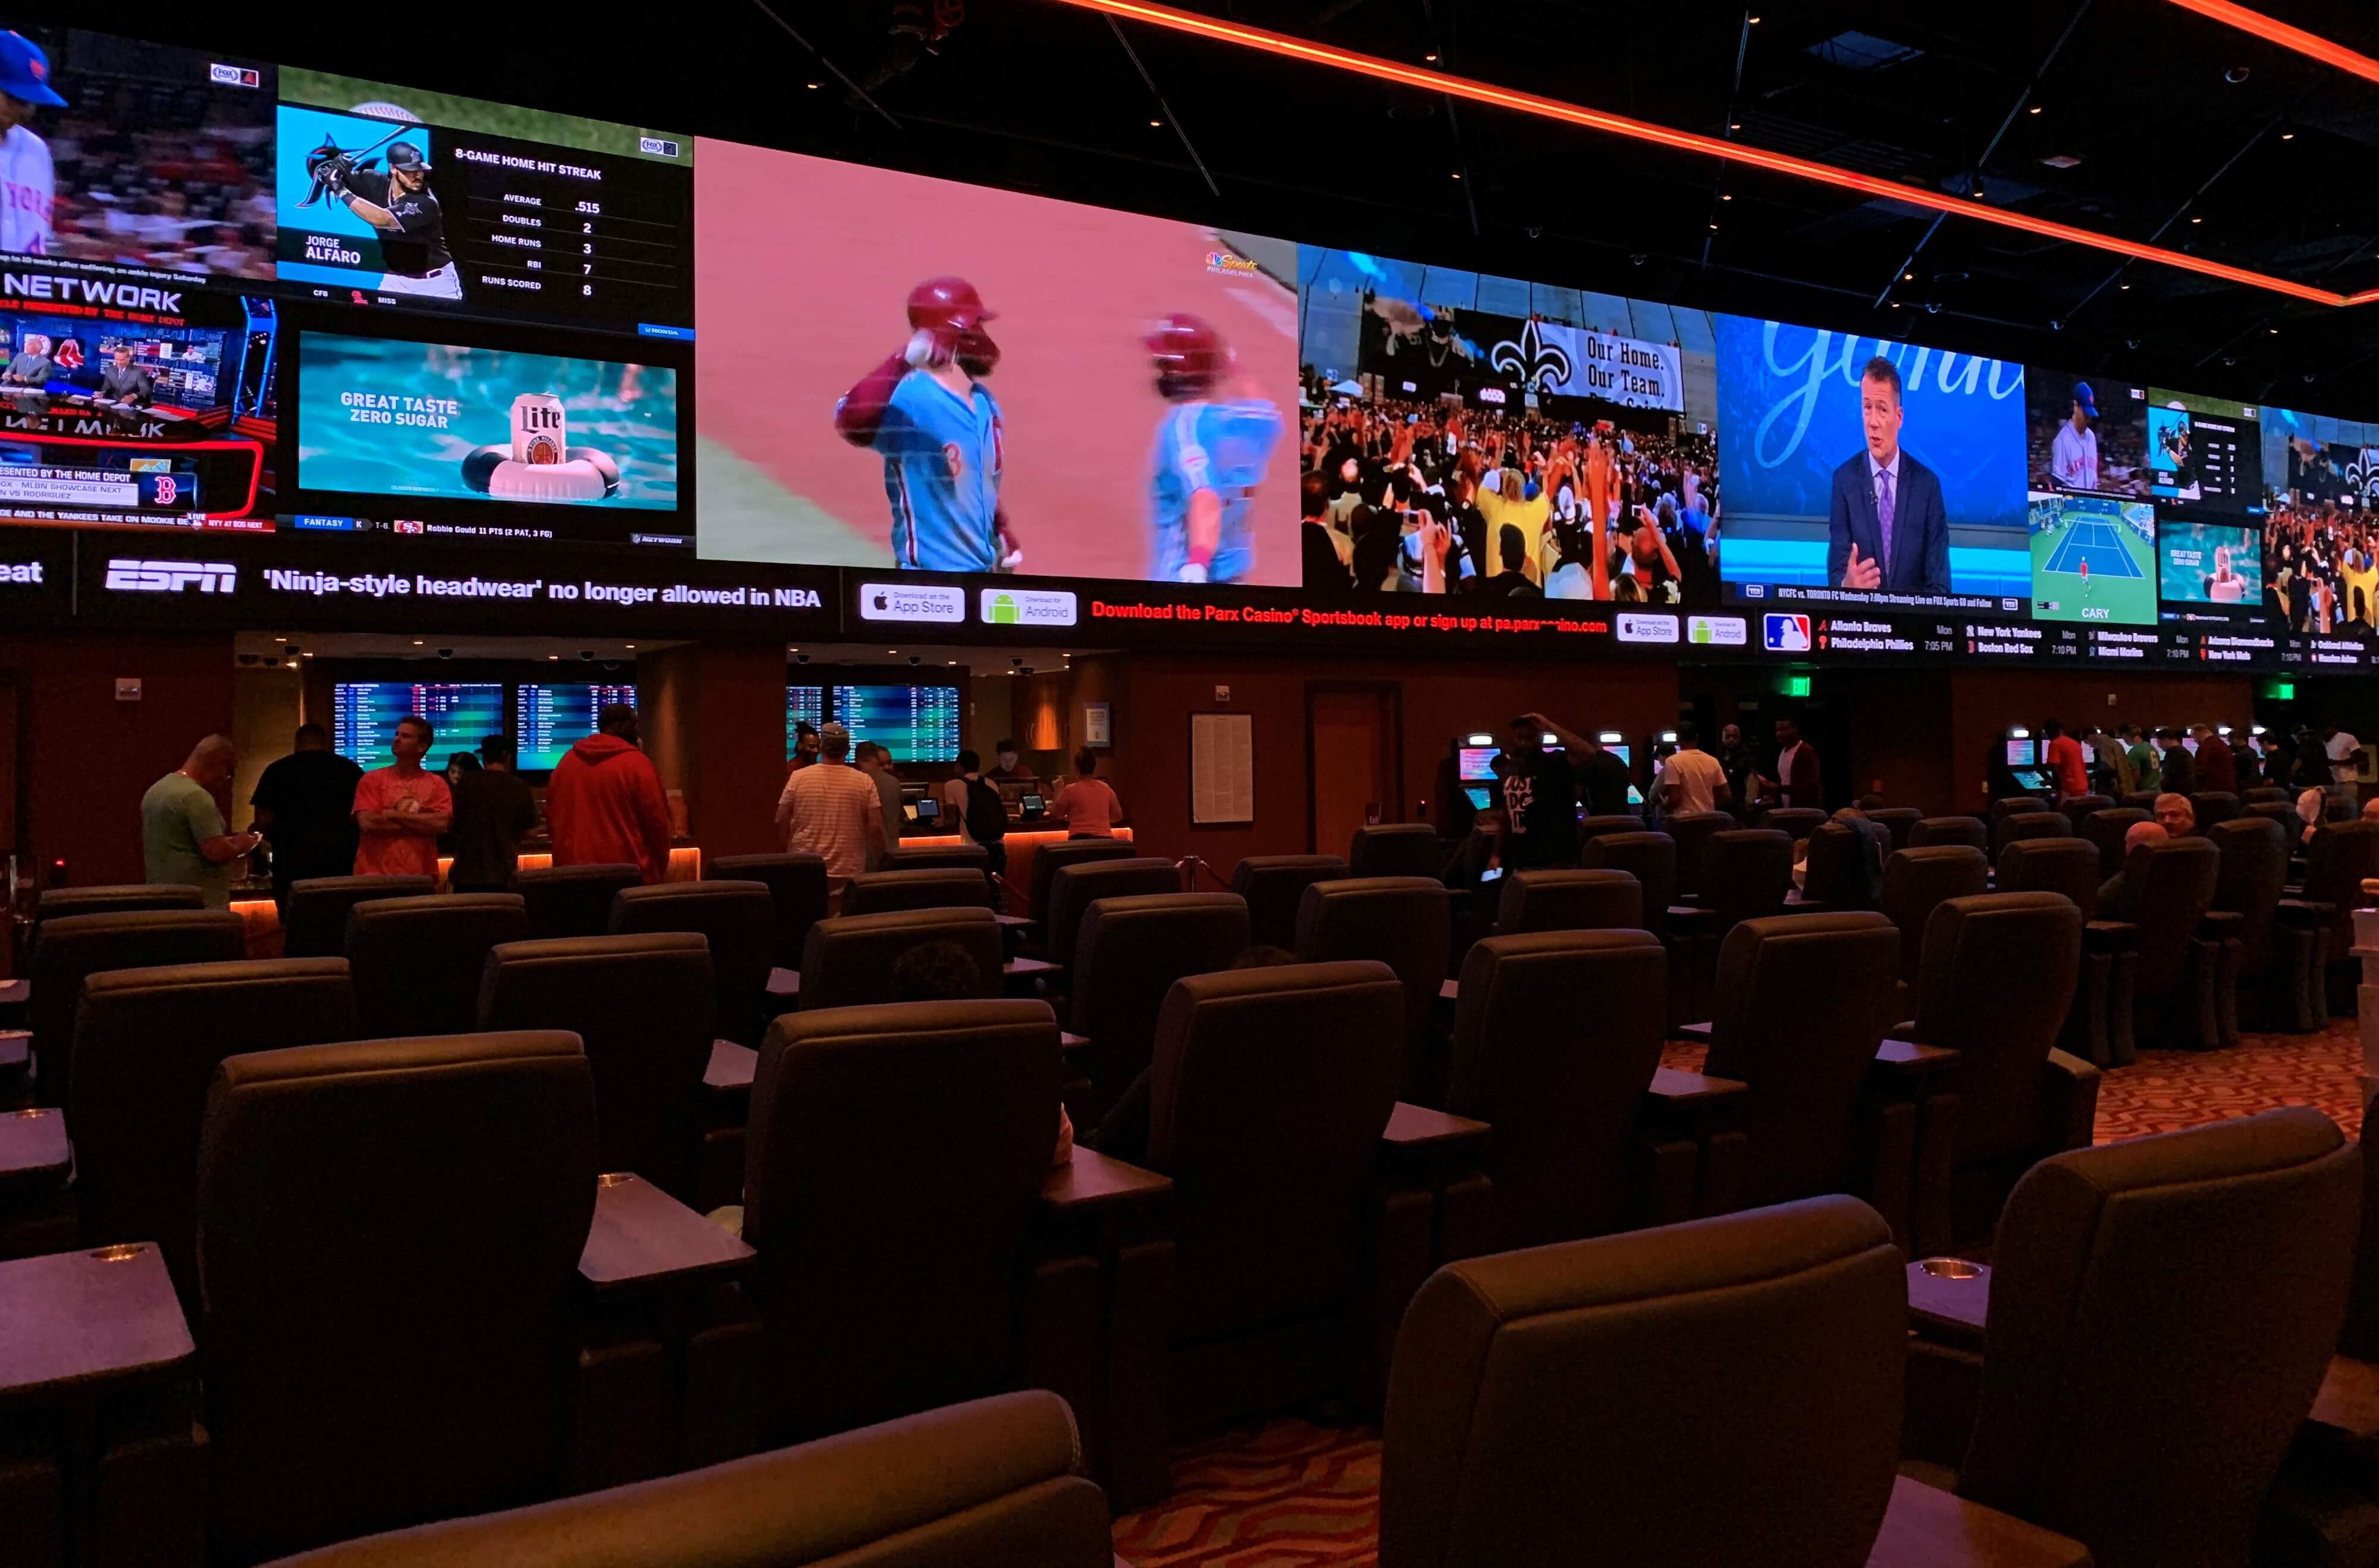 The video wall at Parx Casino Sportsbook